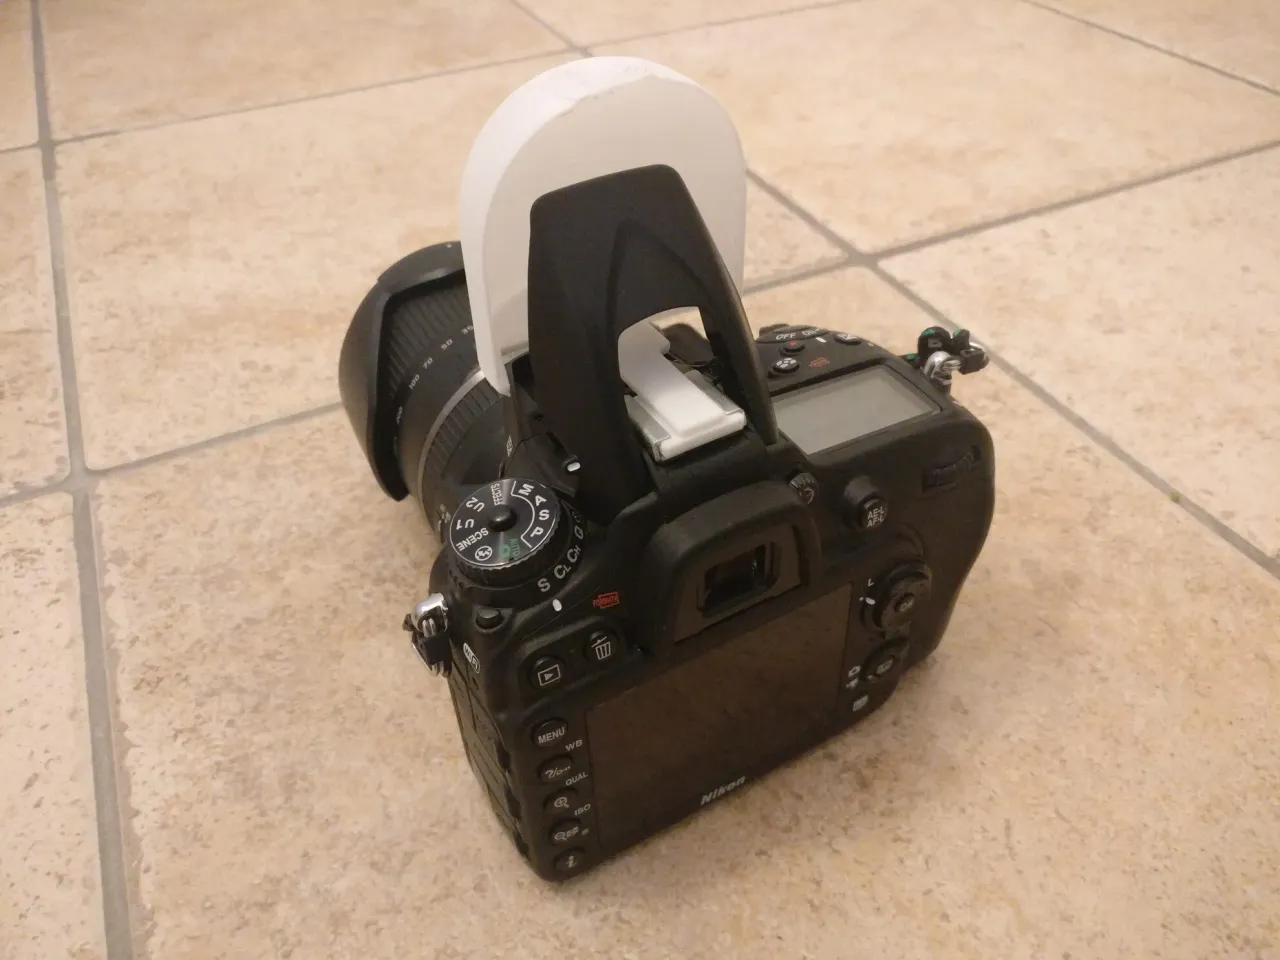 Pop-up flash diffuser (for Nikon D7200) by Simone Rossetto